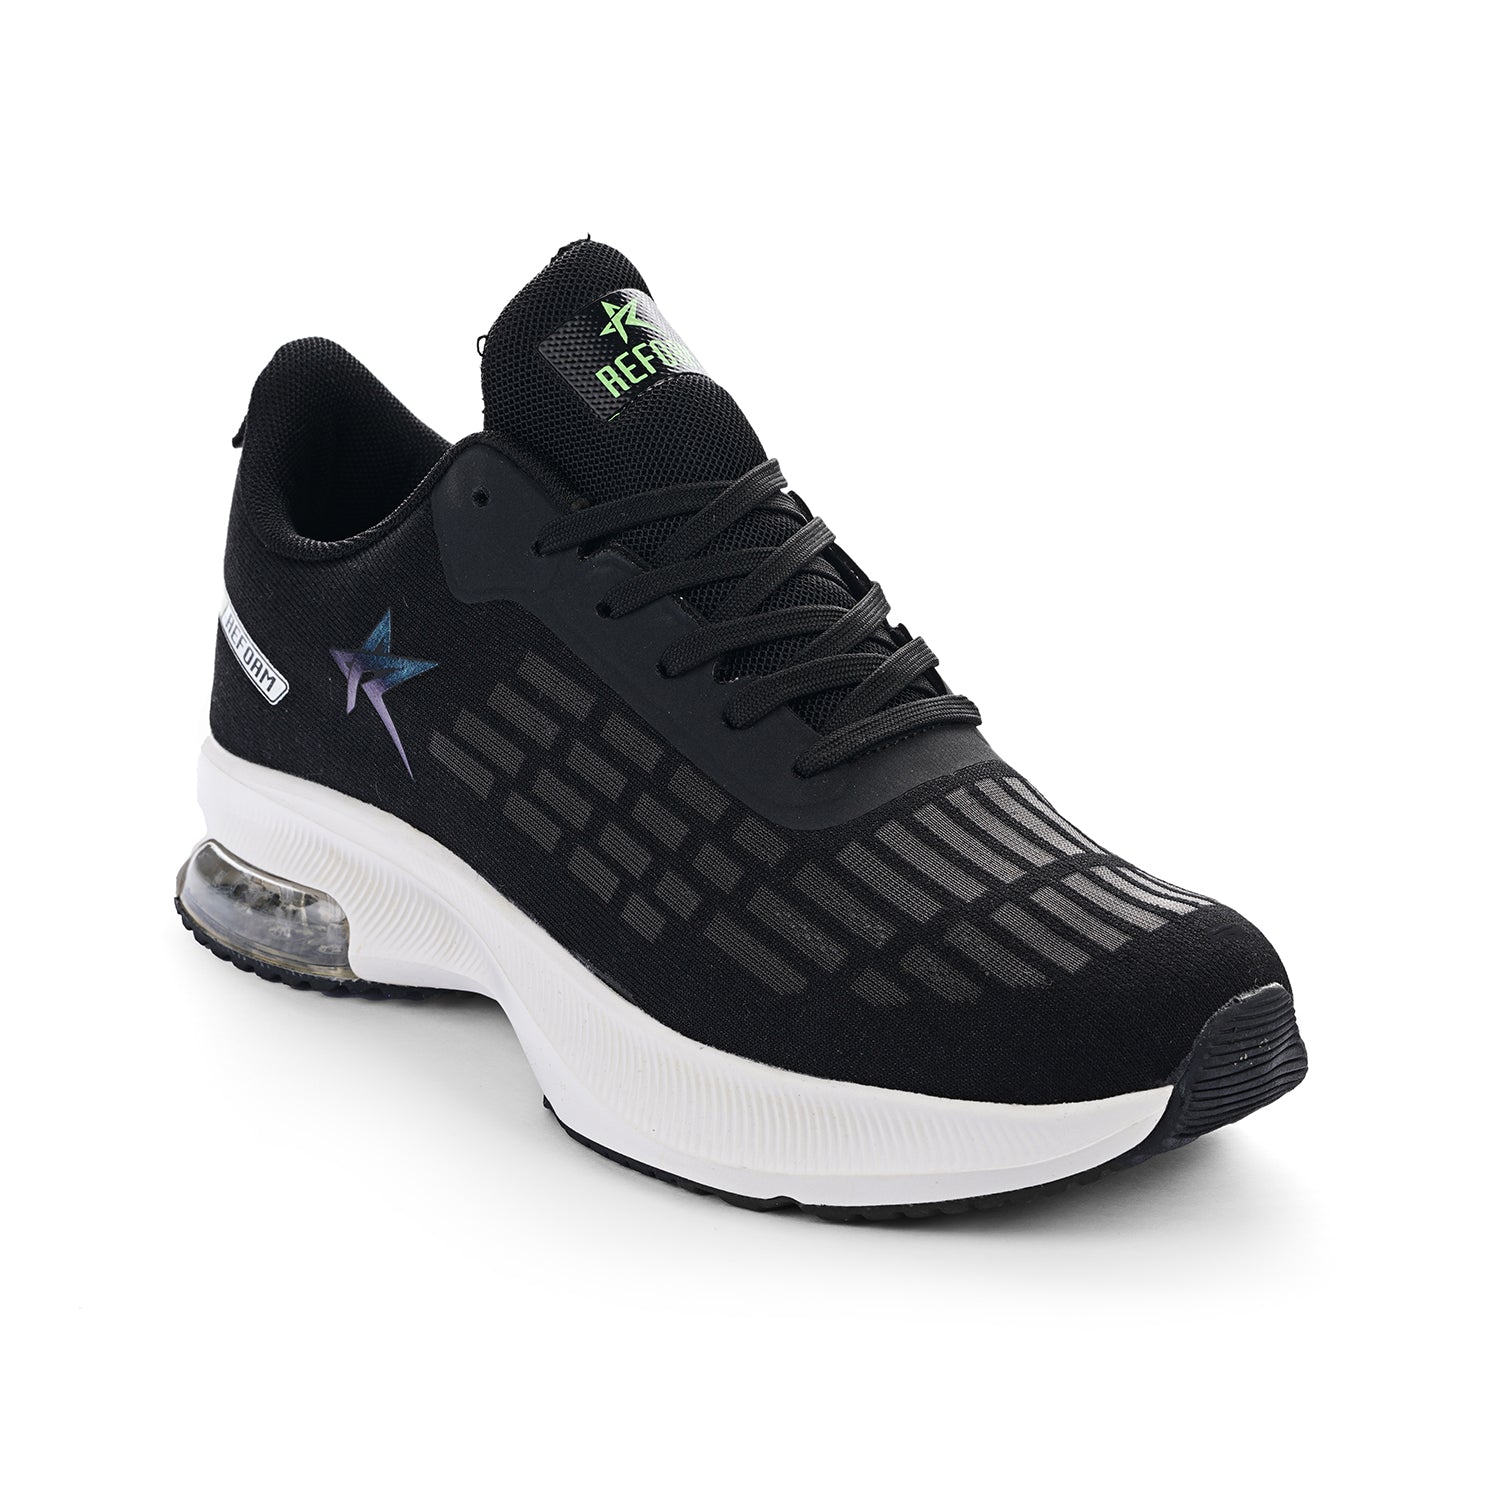 Black Solid Mesh Lace Up Running Sport Shoes For Men